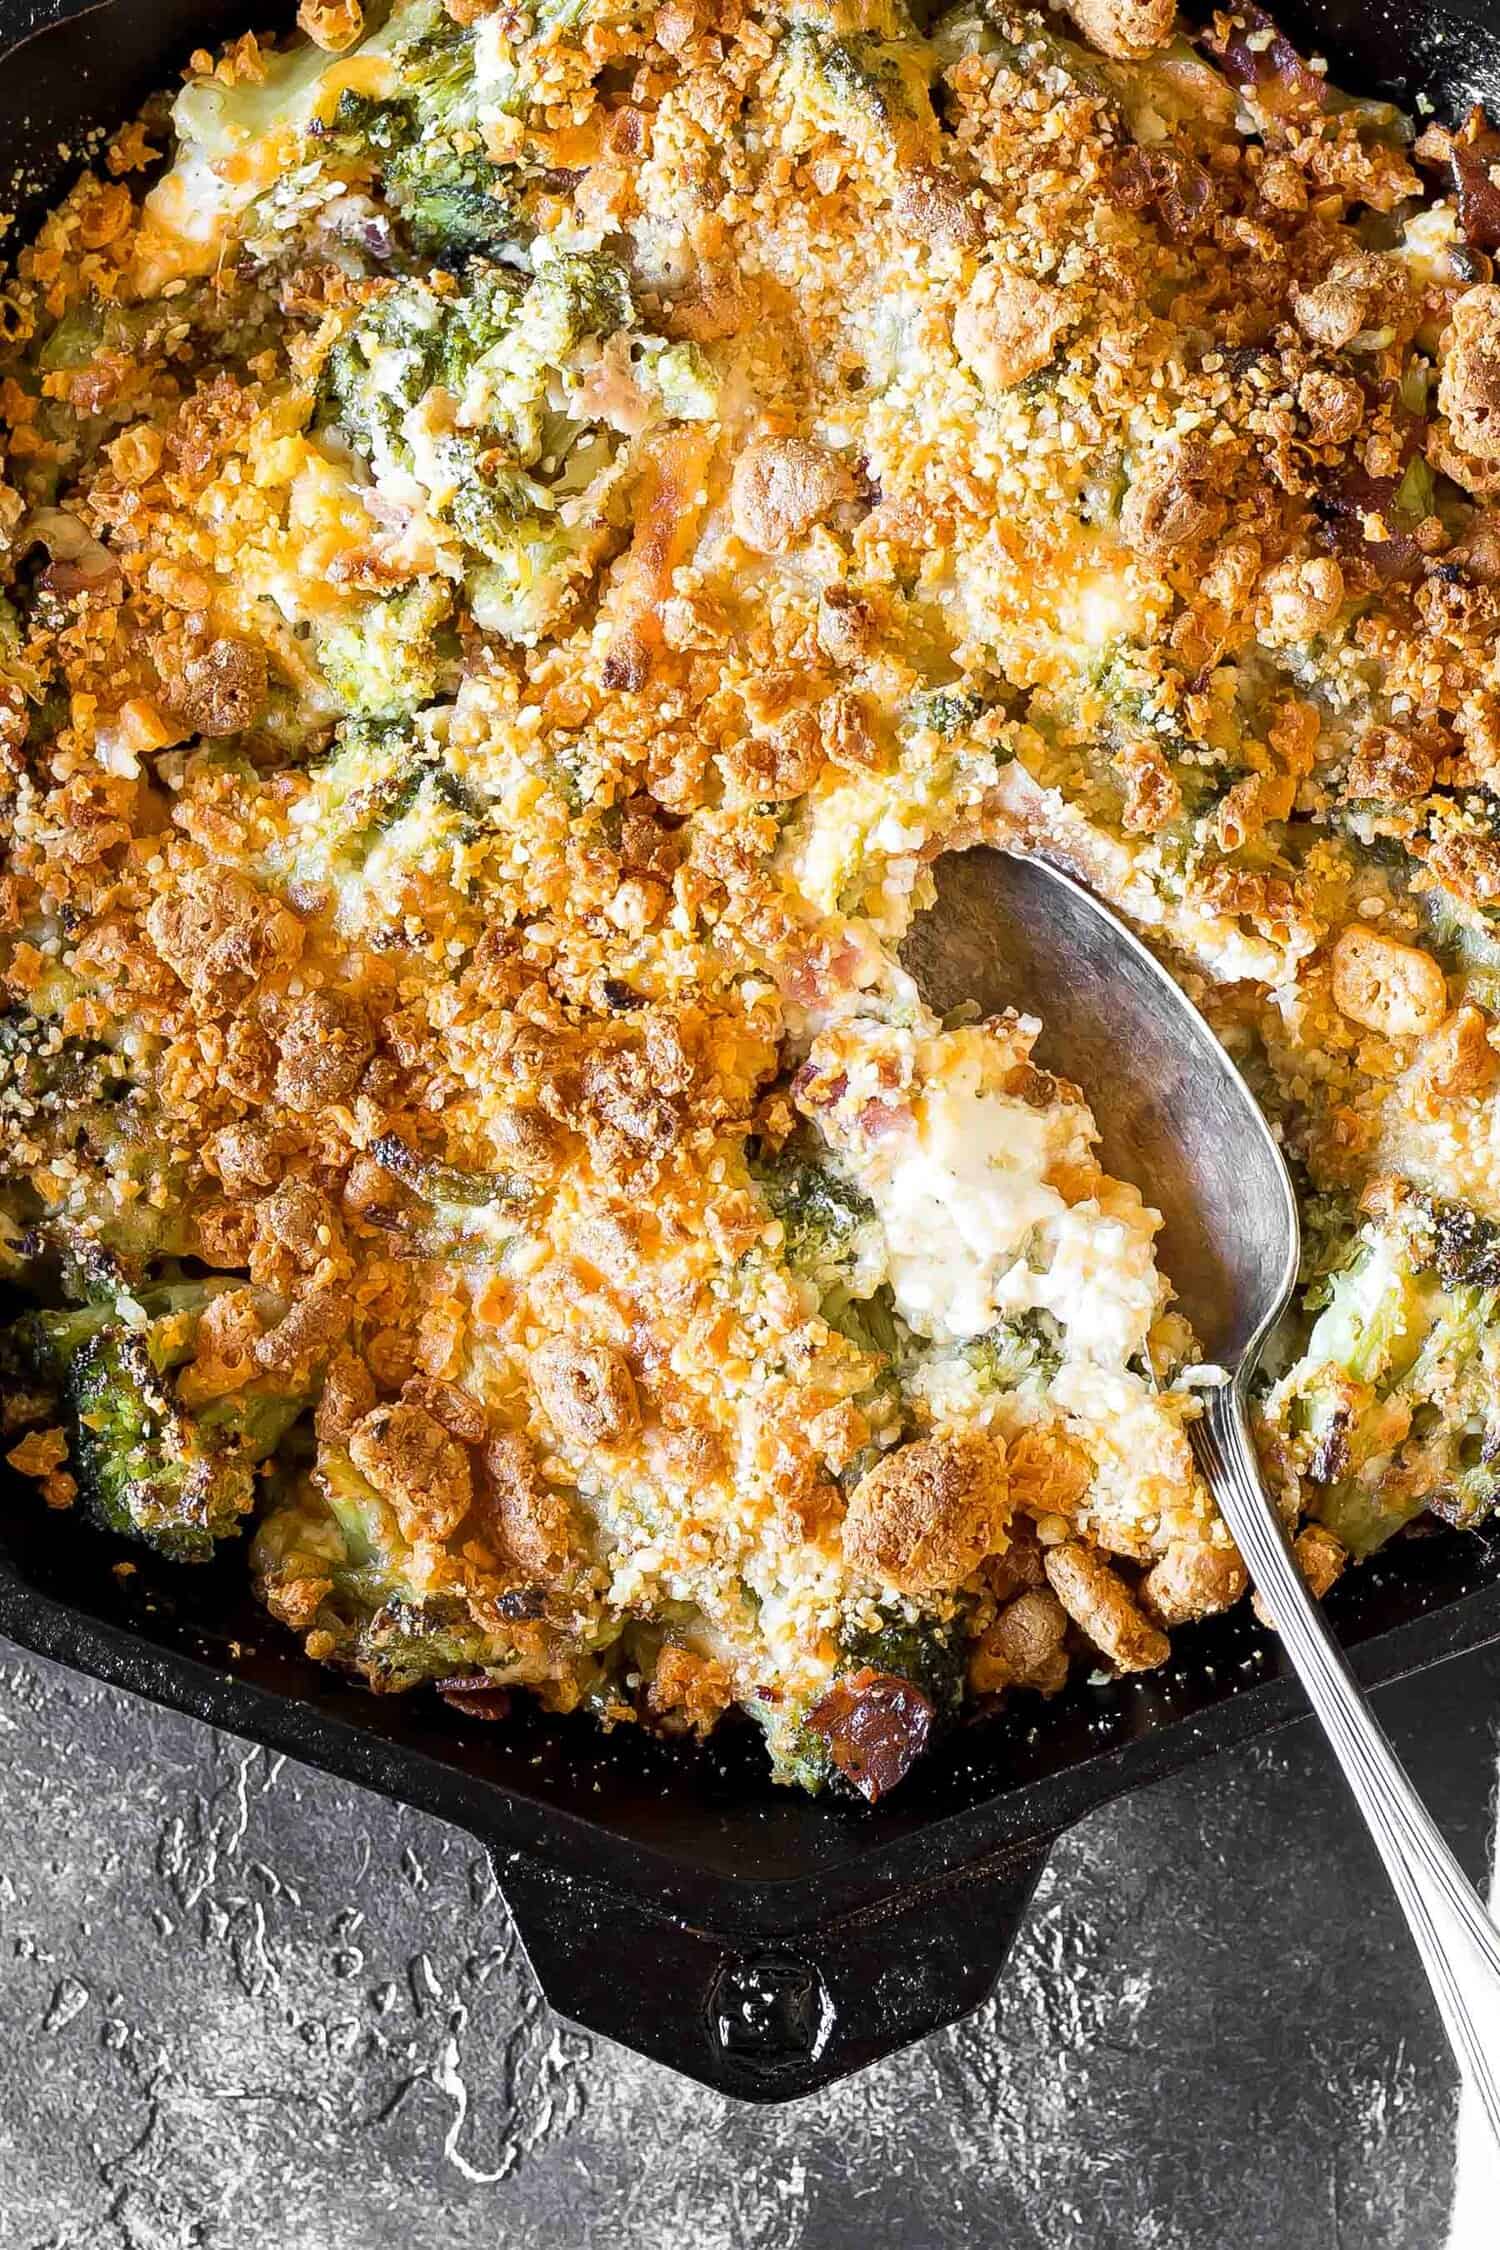 Cheesy Keto Broccoli Casserole in a cast iron skillet with a serving spoon preparing to scoop